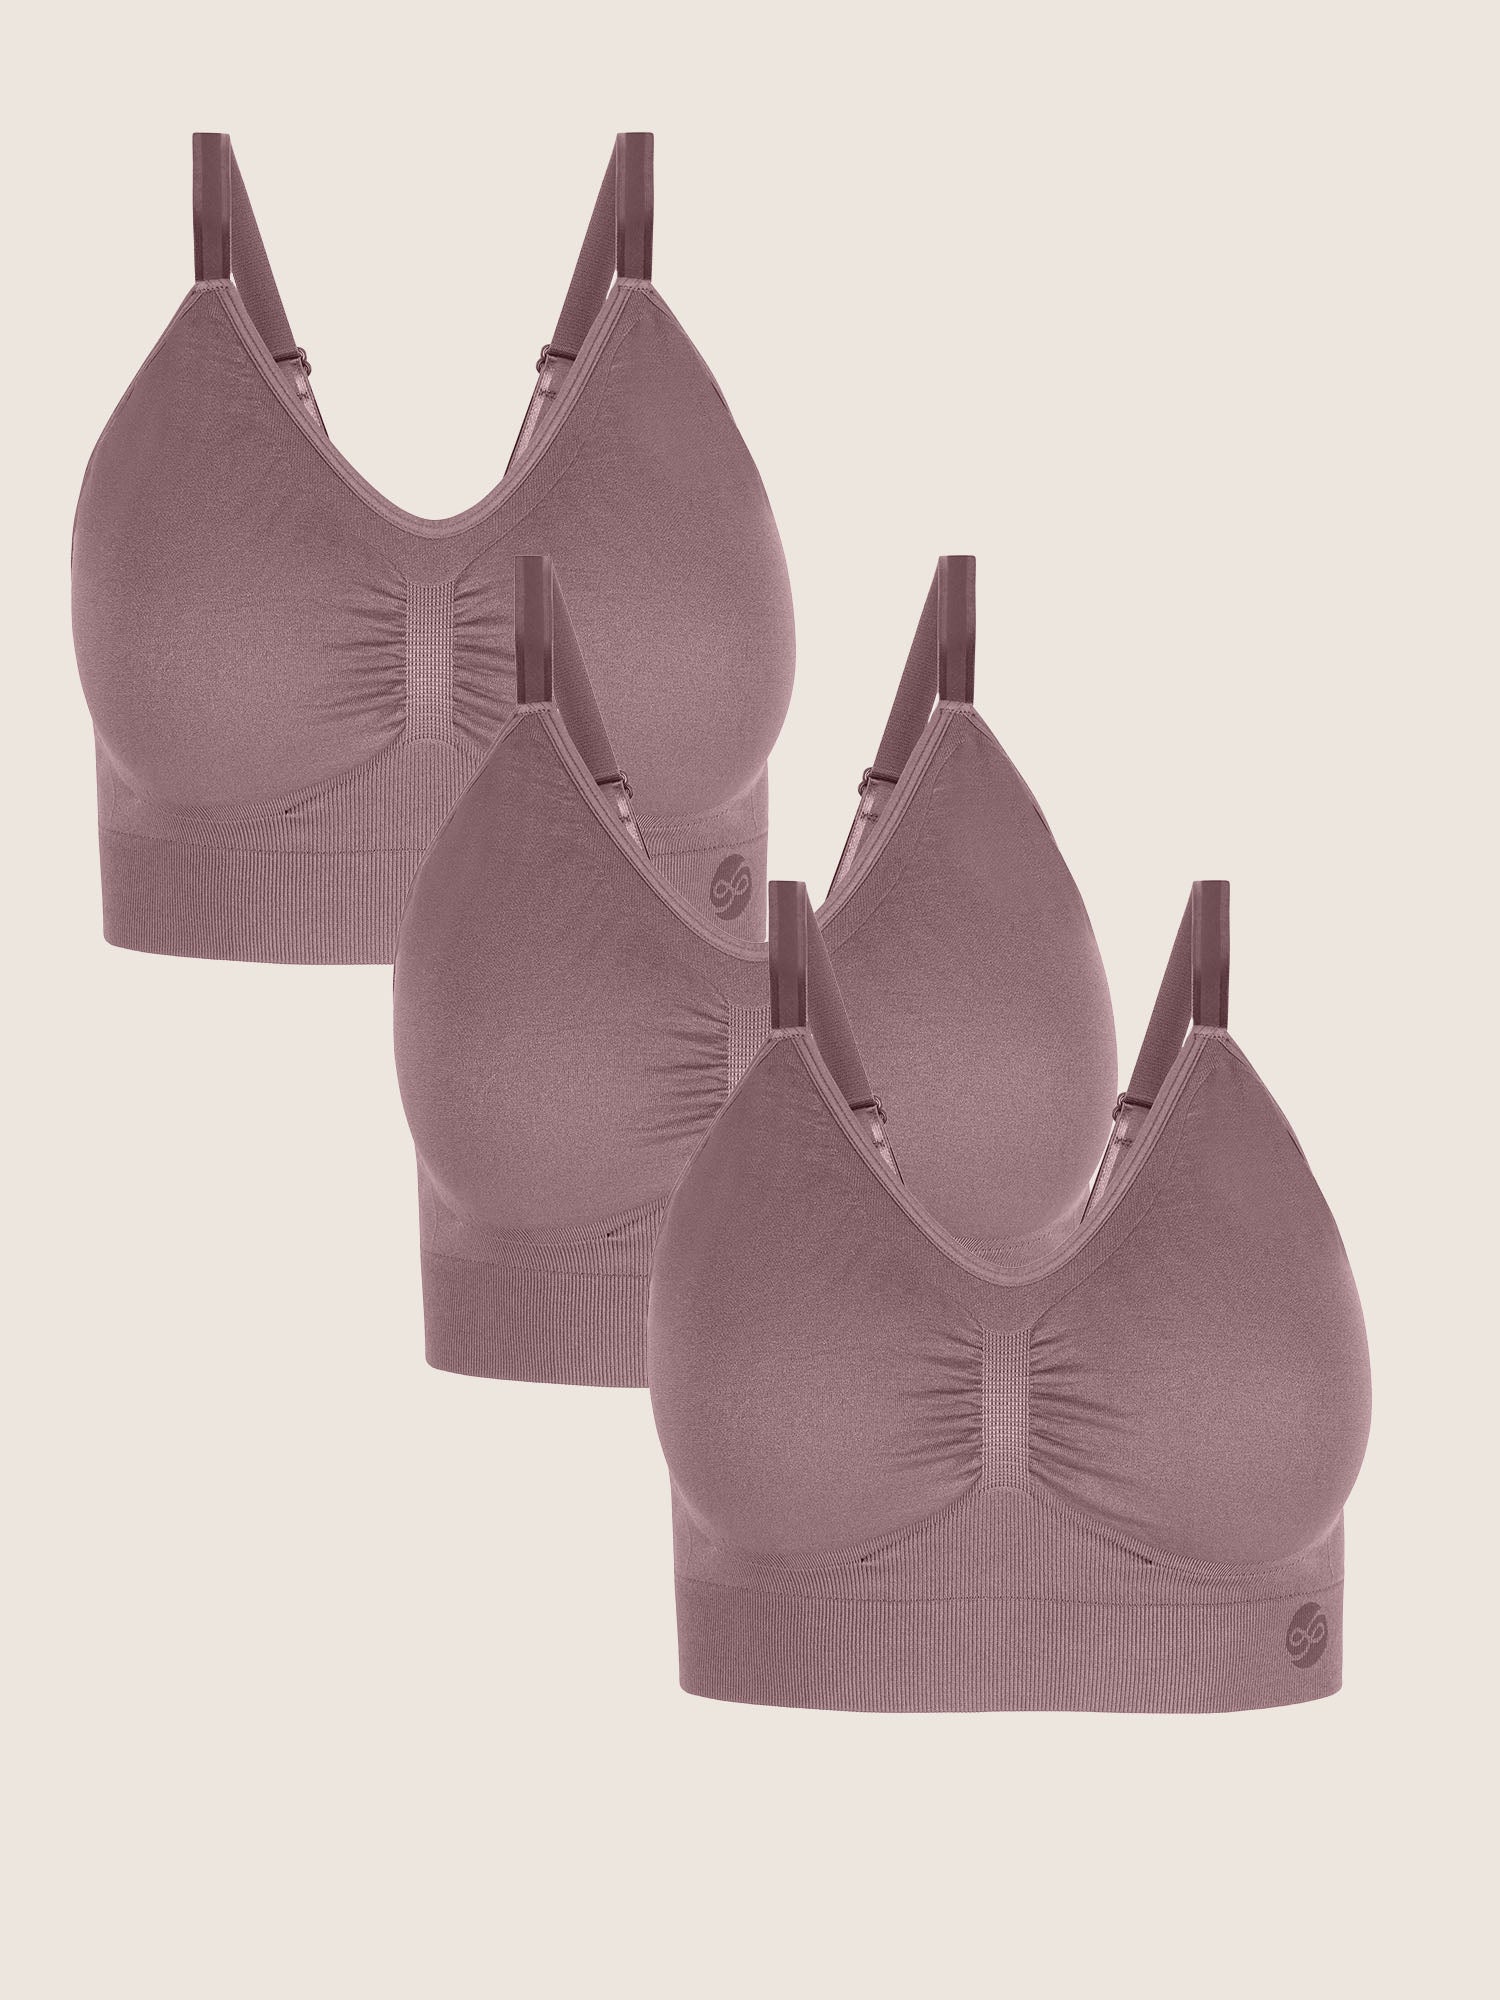 There's Now a Bralette For Busty Women, But It's Already Sold Out